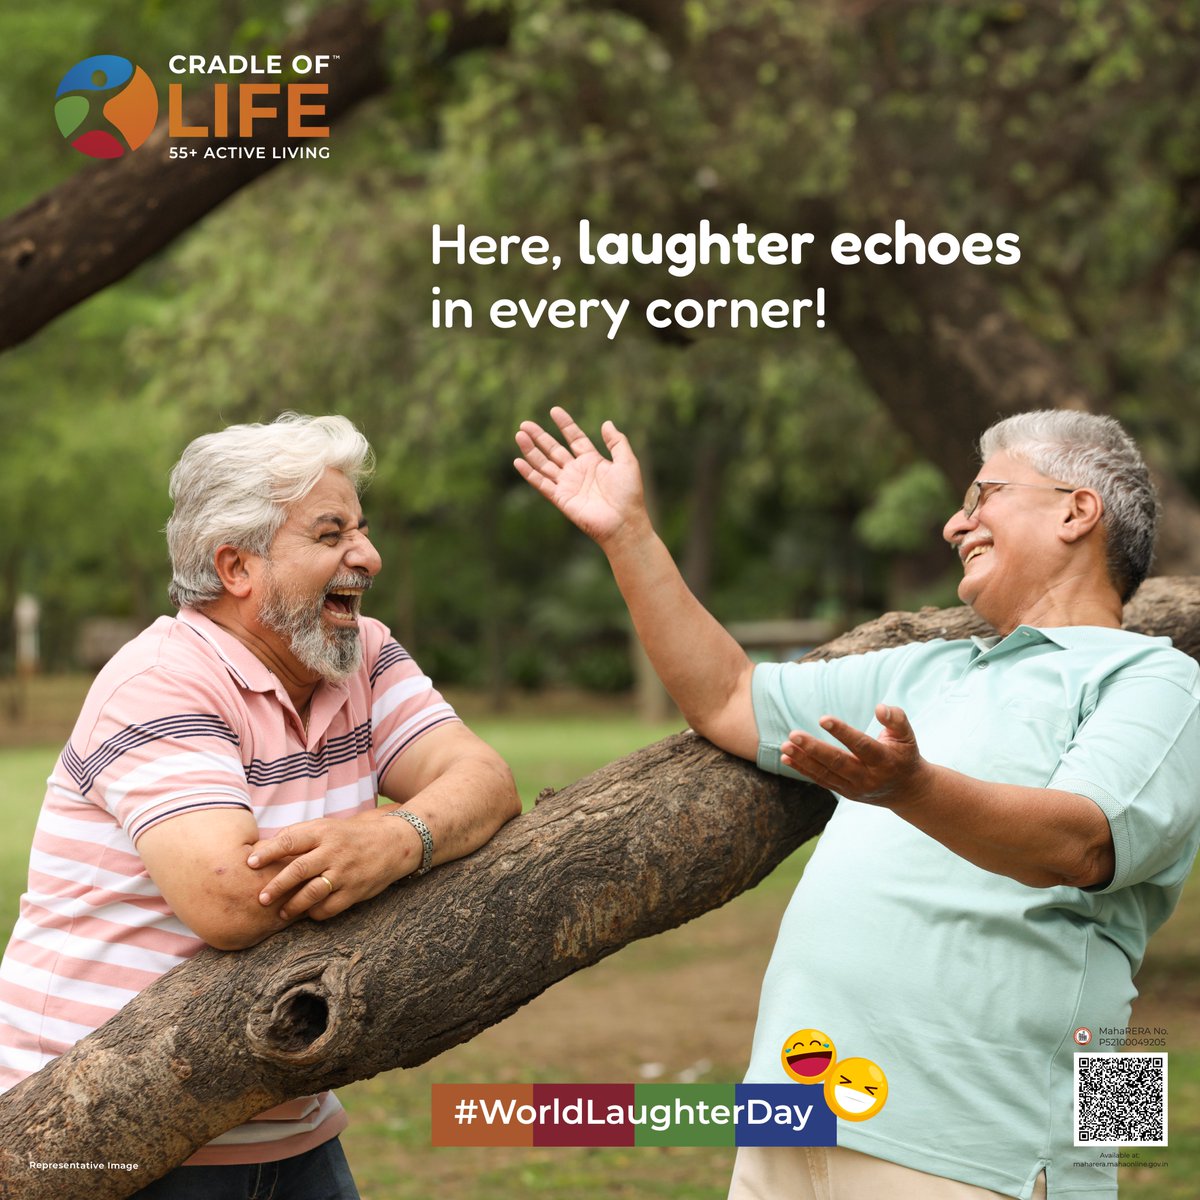 Celebrate life with a community where every gathering is filled with joy and laughter. Cradle of Life wishes everyone a Happy World Laughter Day.
#WorldLaughterDay

#JoyfulLiving #ActiveLiving #DynamicLiving #CradleOfLife #SeniorLiving #TimeForYourself